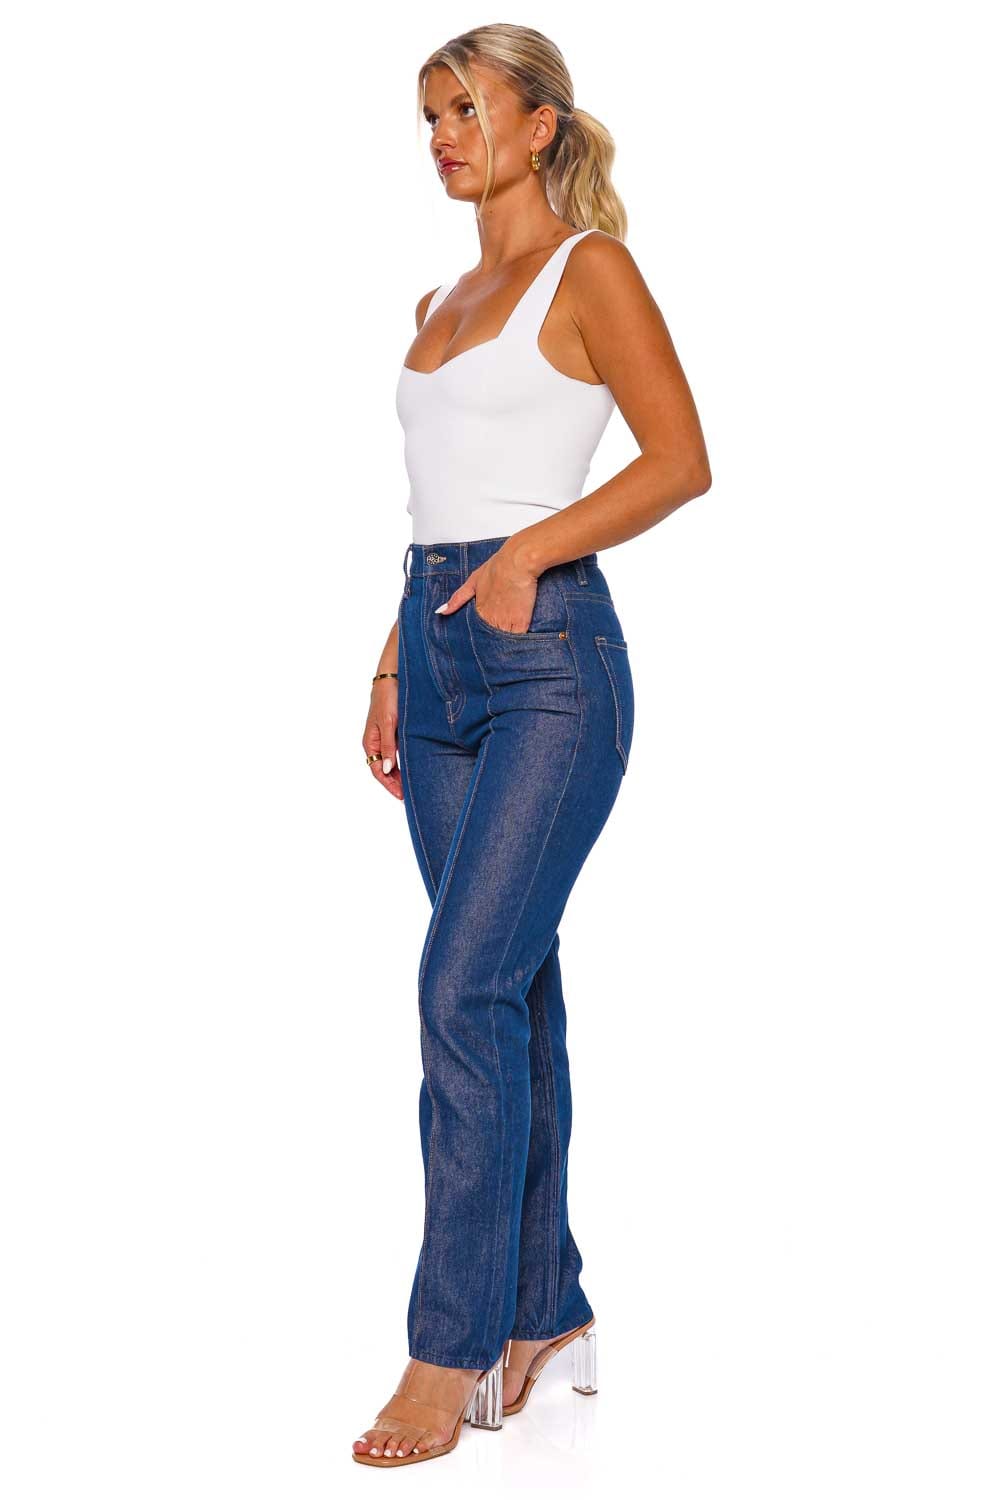 MOTHER Denim THE PIN UP TIPPY TOP SWEET TOO 10464-1321 CLEAN YOUR PLATE